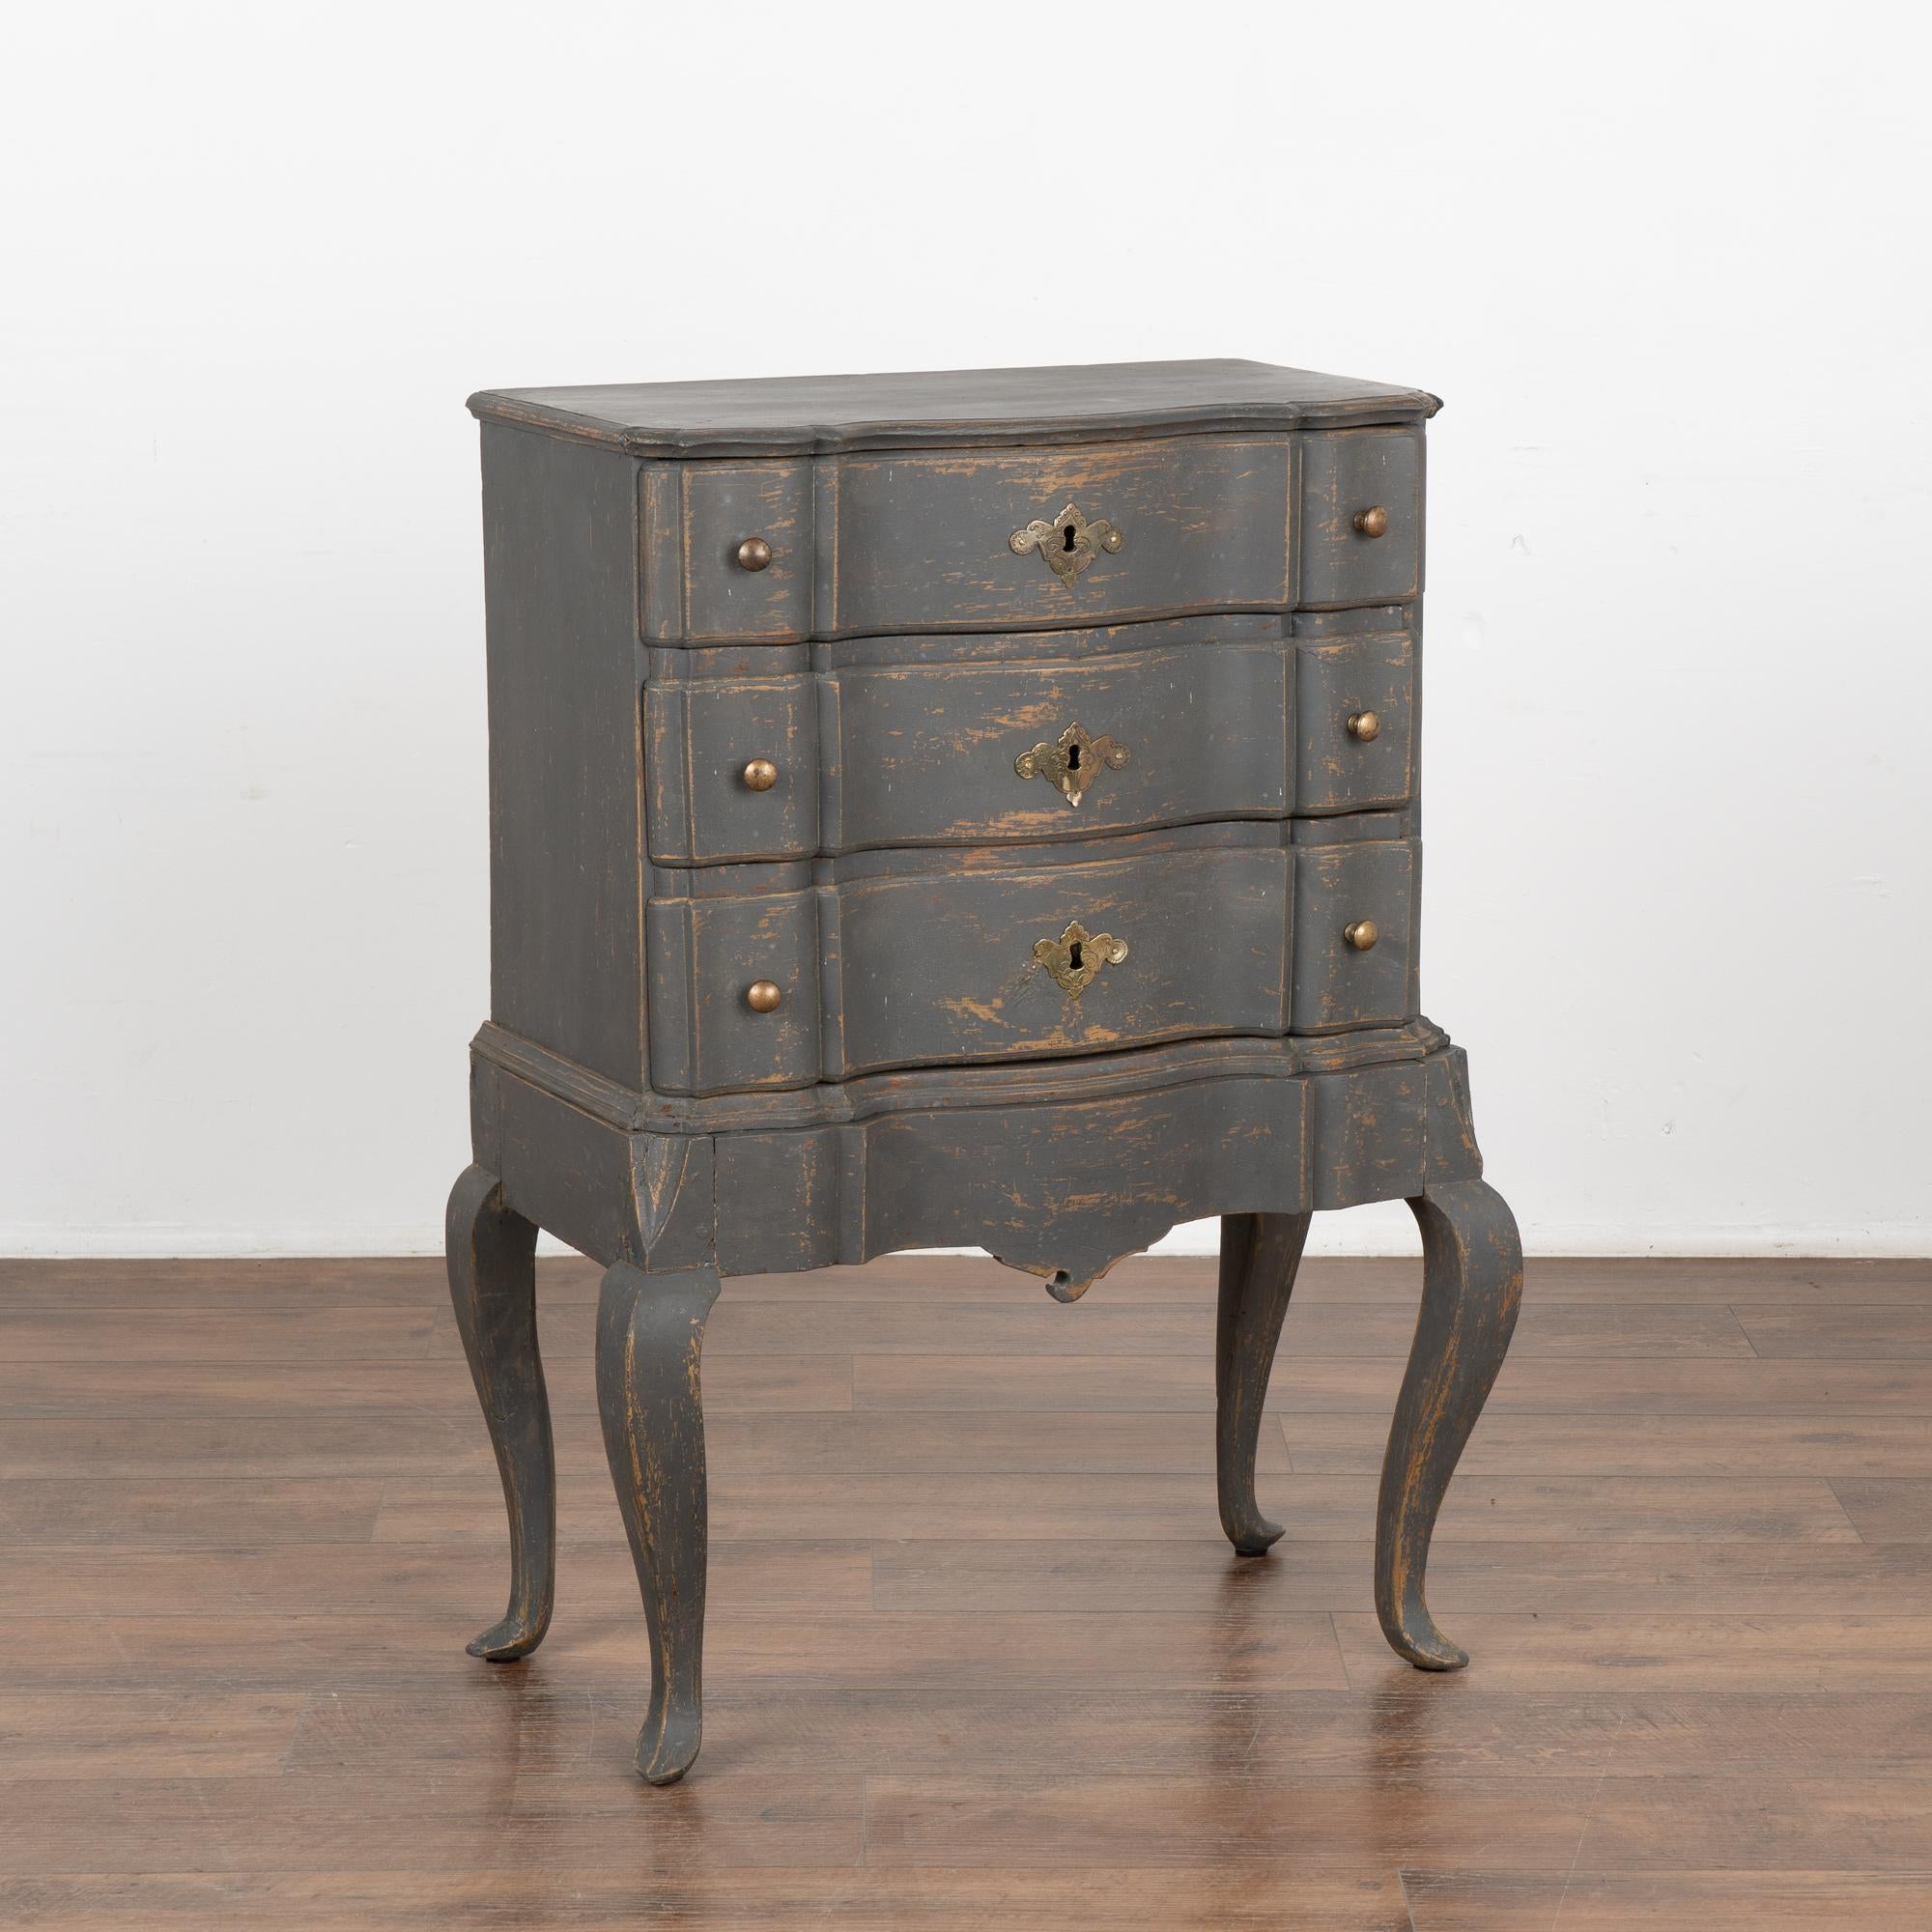 A small oak rococo chest of three drawers with brass key escutcheons. The scalloped edge is carried down through the 3 drawer fronts and bottom apron resulting in an elegant chest all resting on four elongated cabriole legs.
The newer,